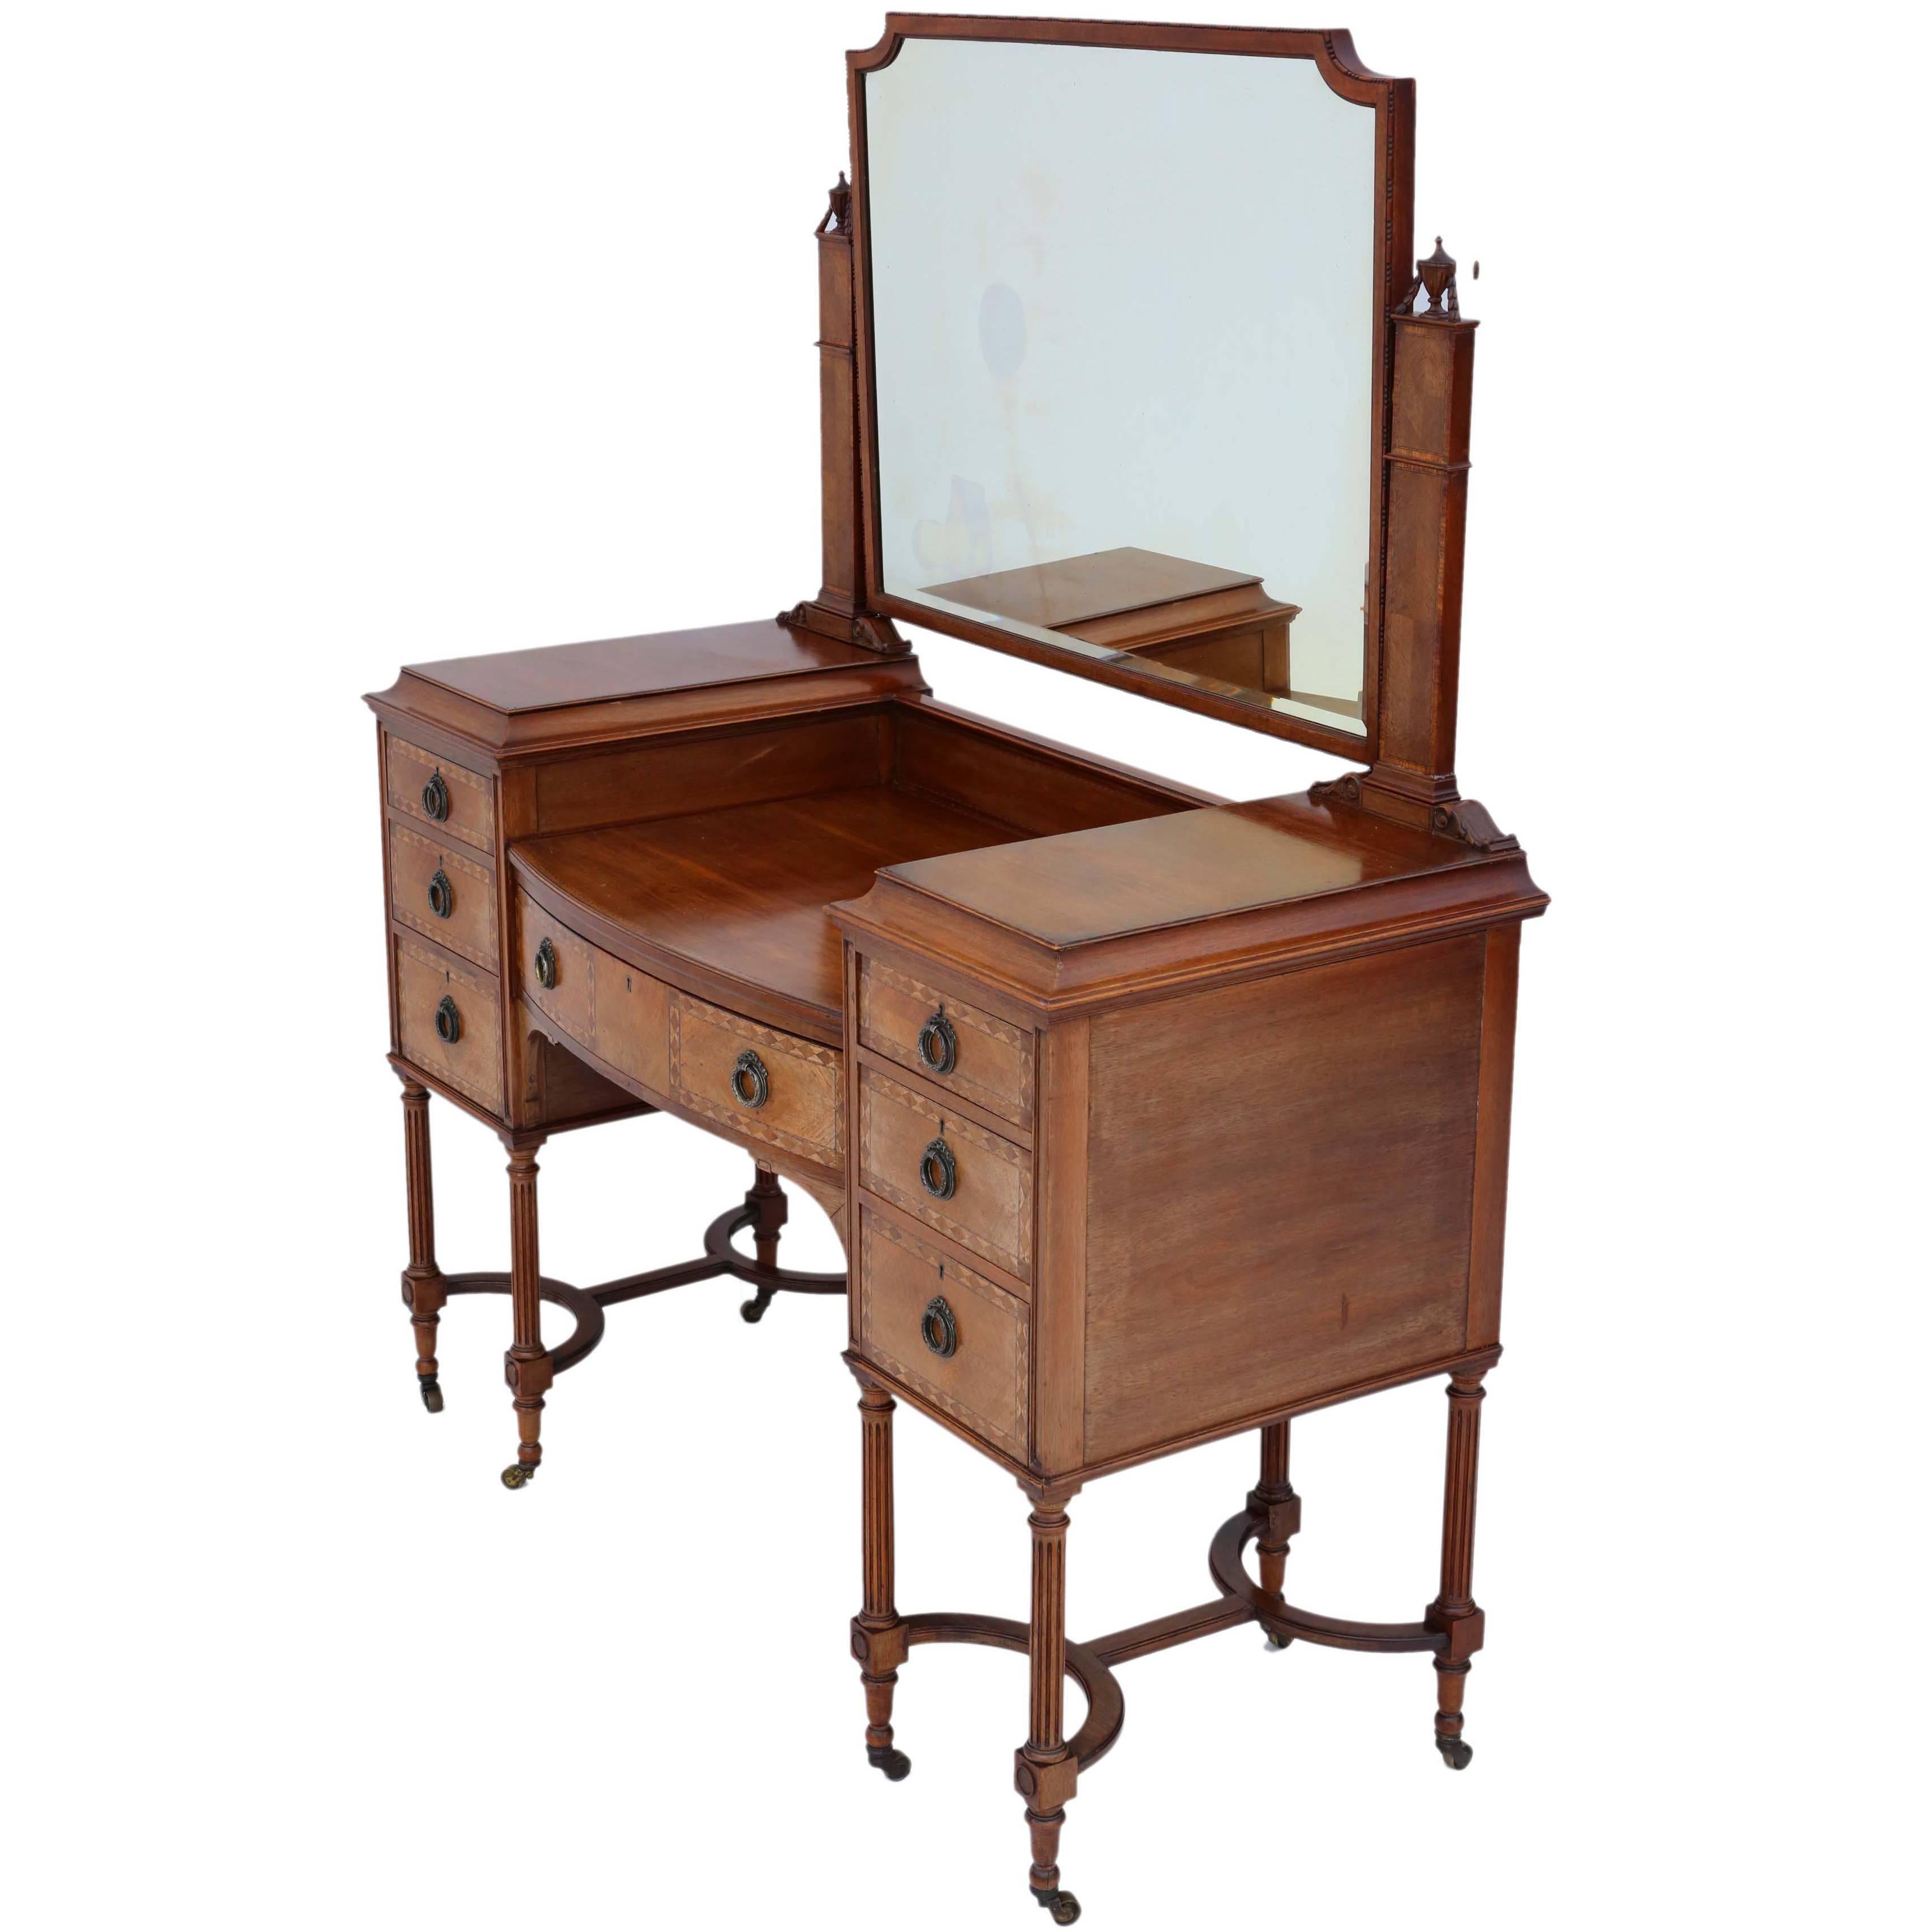 Antique Quality Edwardian circa 1900-1910 Inlaid Rosewood Dressing Table For Sale